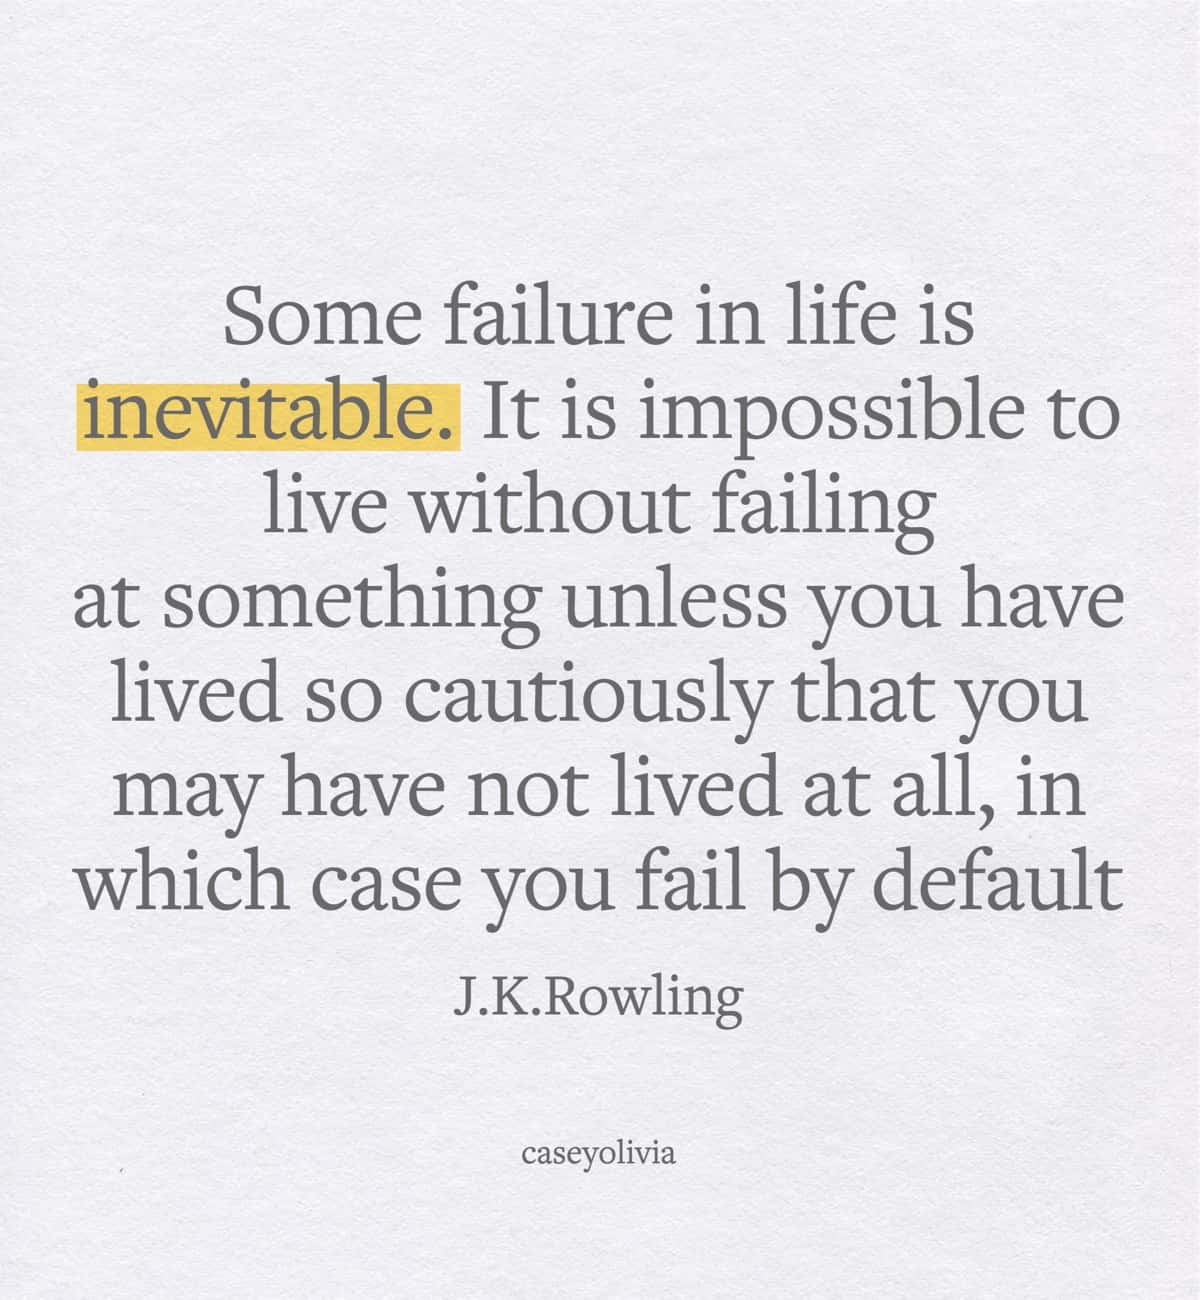 jk rowling boss babe quote to inspire